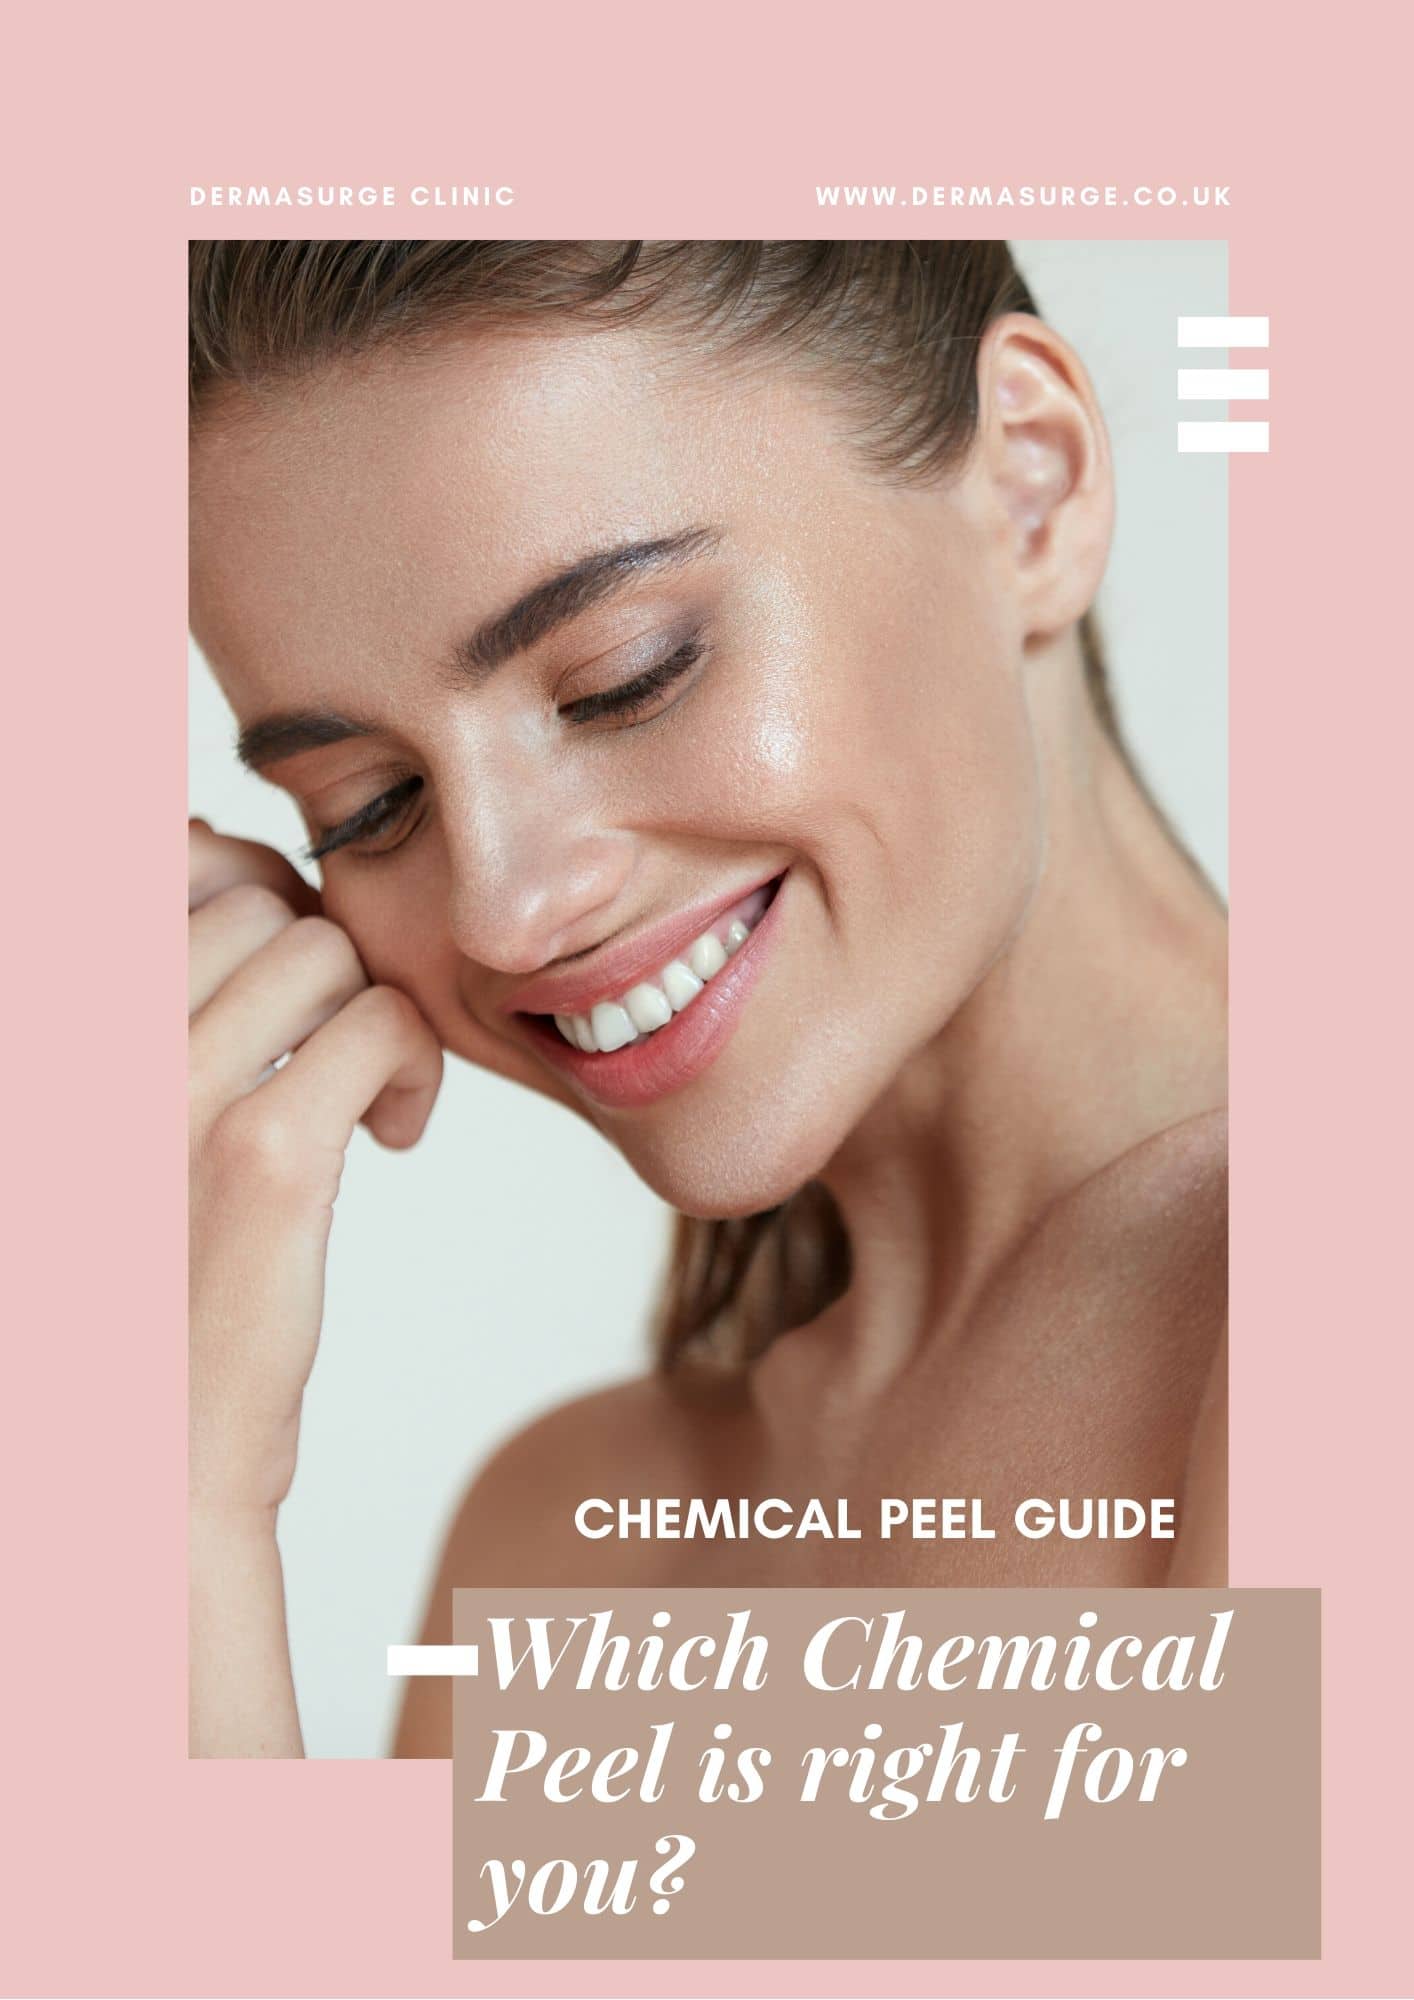 Download our chemical peel guide 